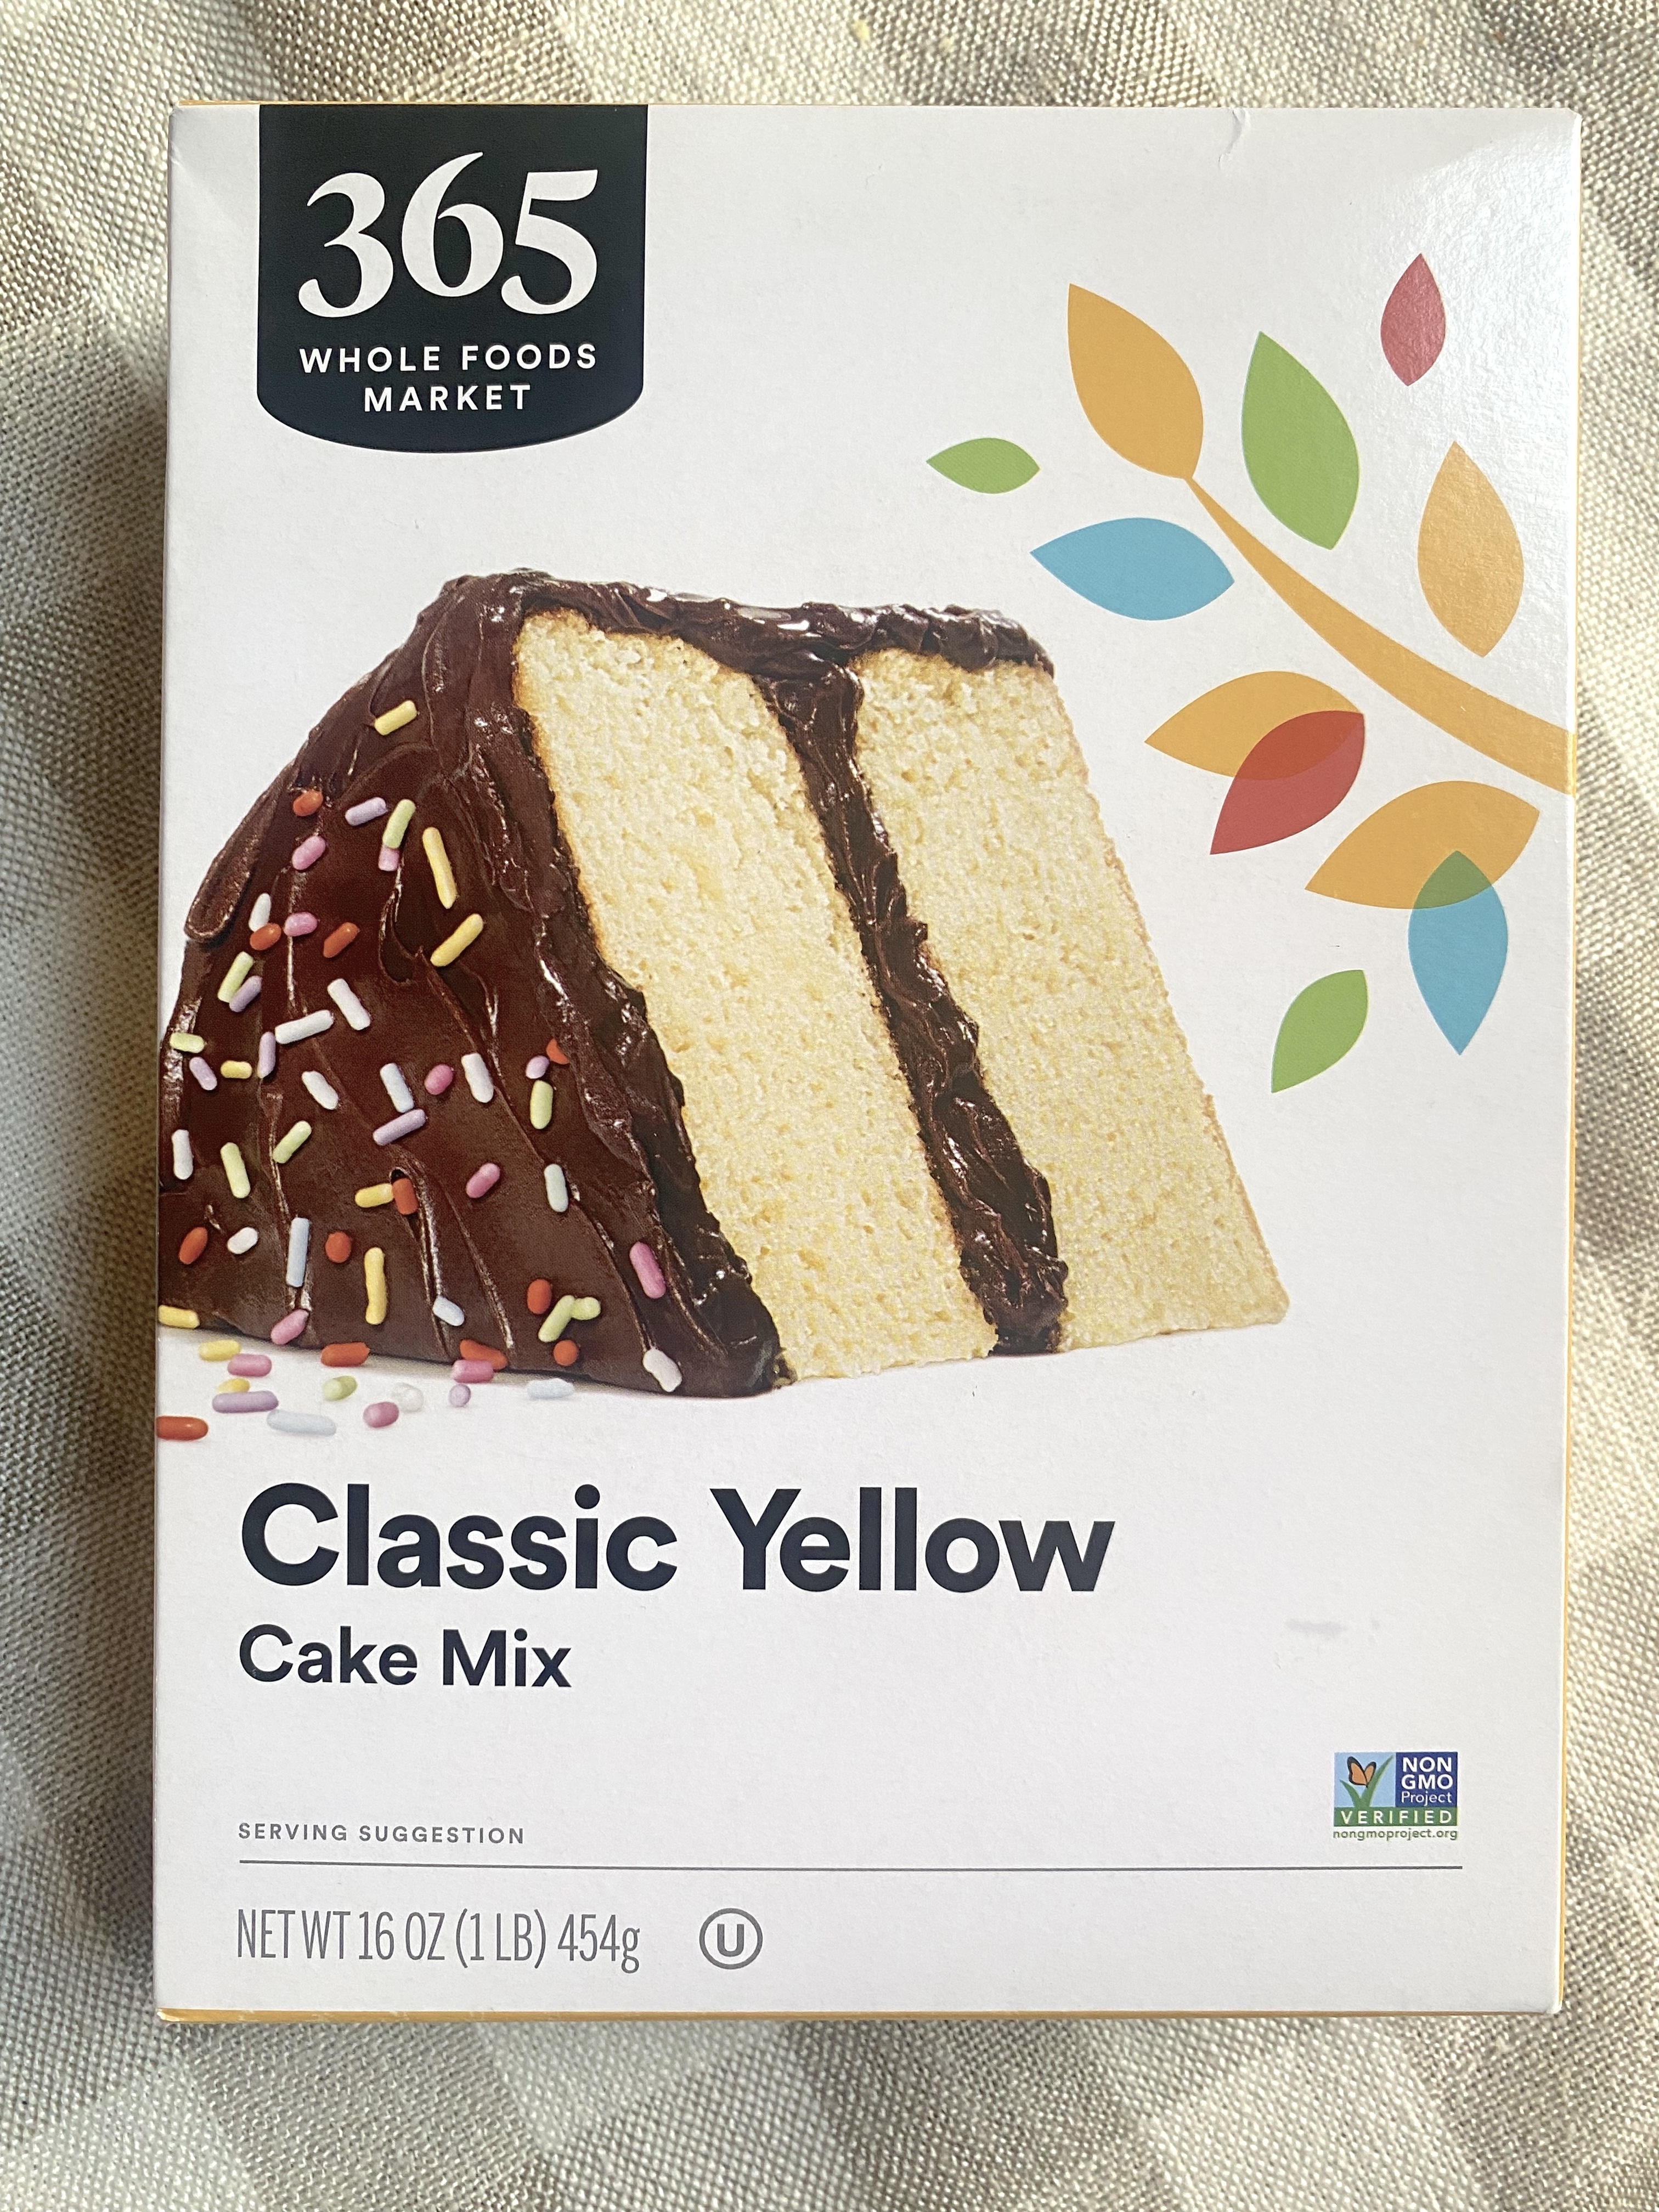 a box of whole foods cake mix